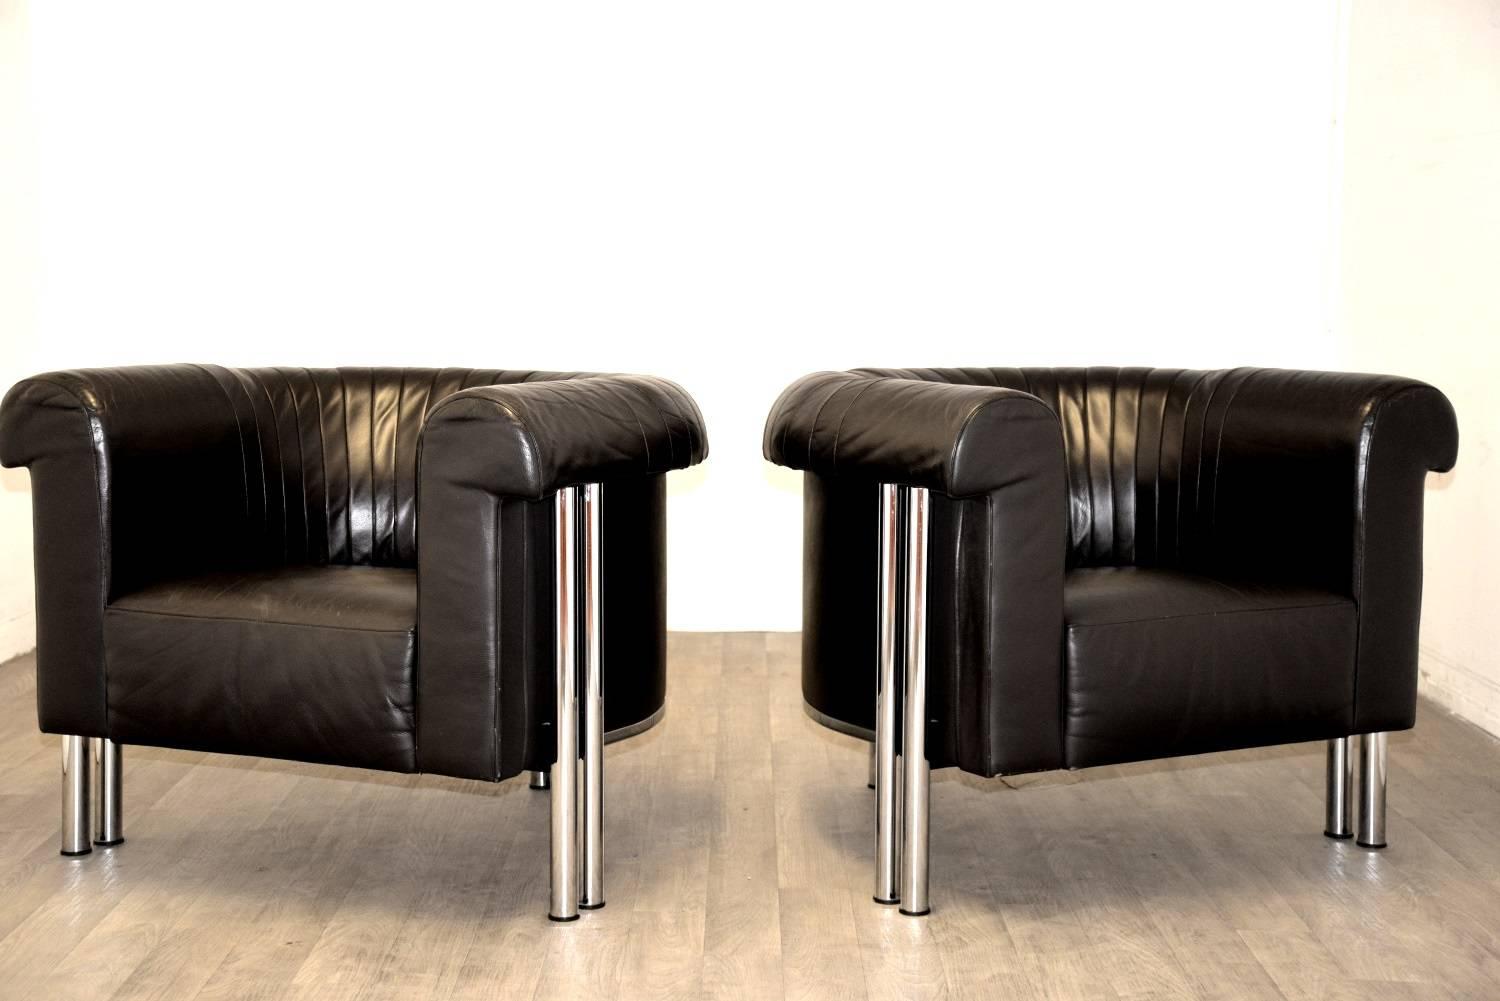 Late 20th Century  Swiss de Sede Executive Lounge Armchairs, 1980s For Sale